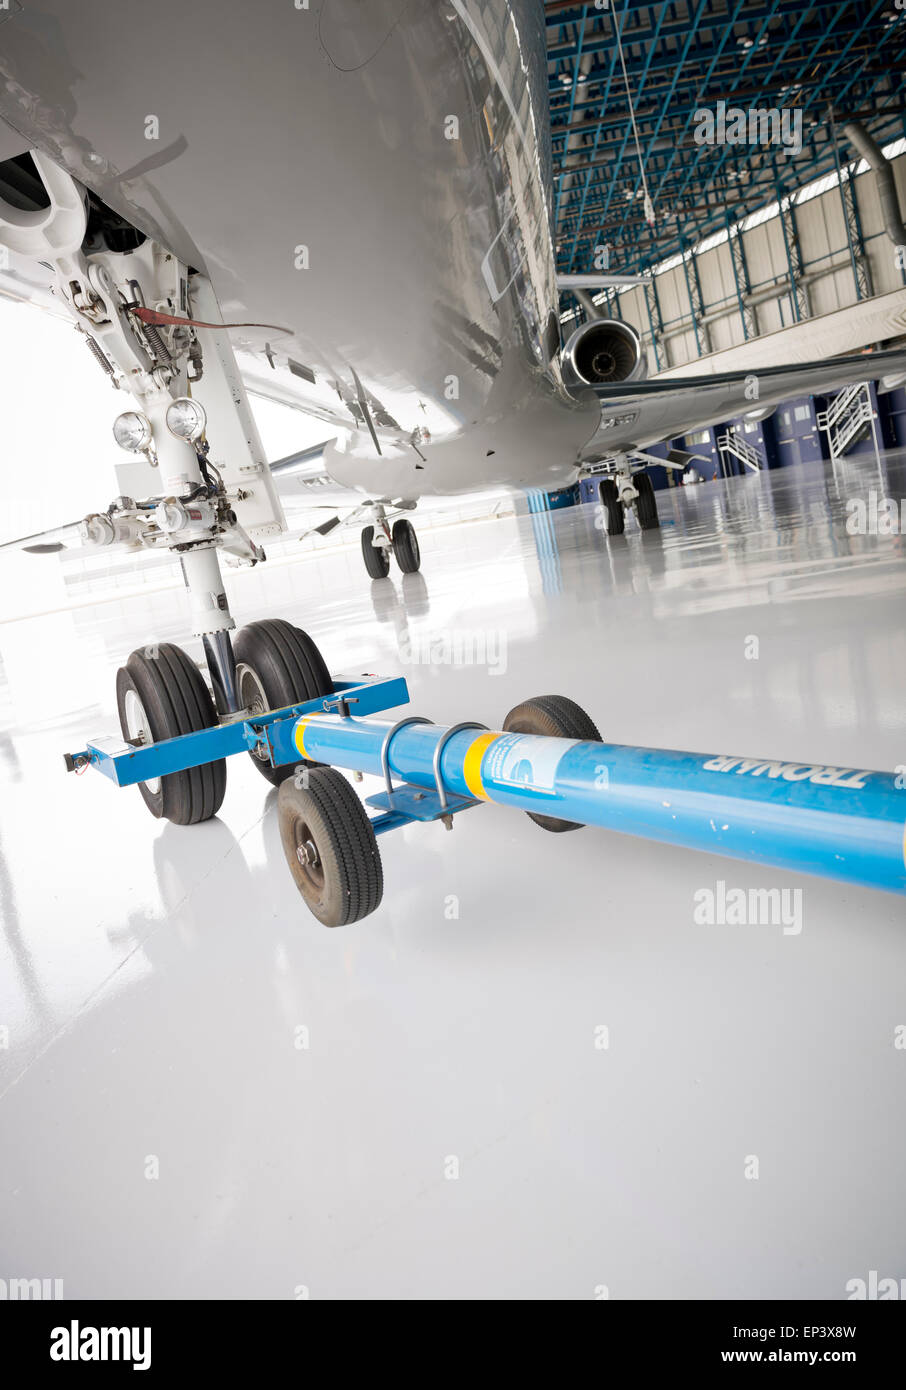 Airplane in a hanger ready to be pushed out with a tow bar connected to the nose landing gear Stock Photo